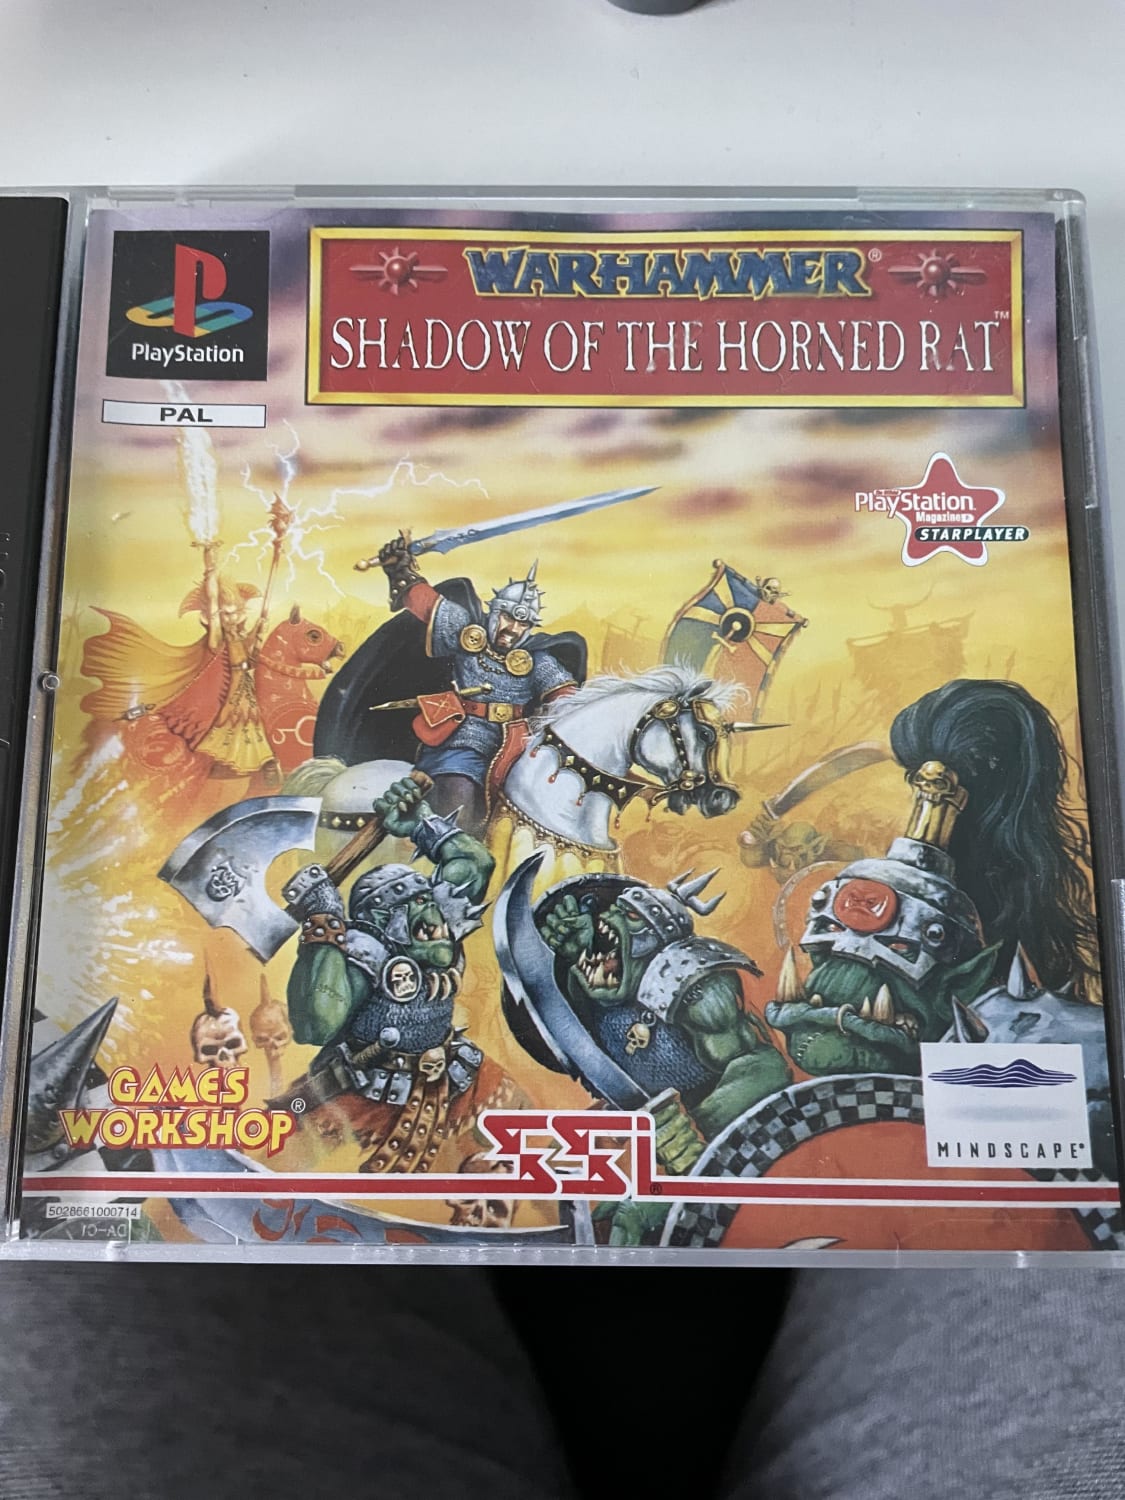 Picked up this at the weekend. A warhammer ps1 game but never seen it before, has anyone played it?